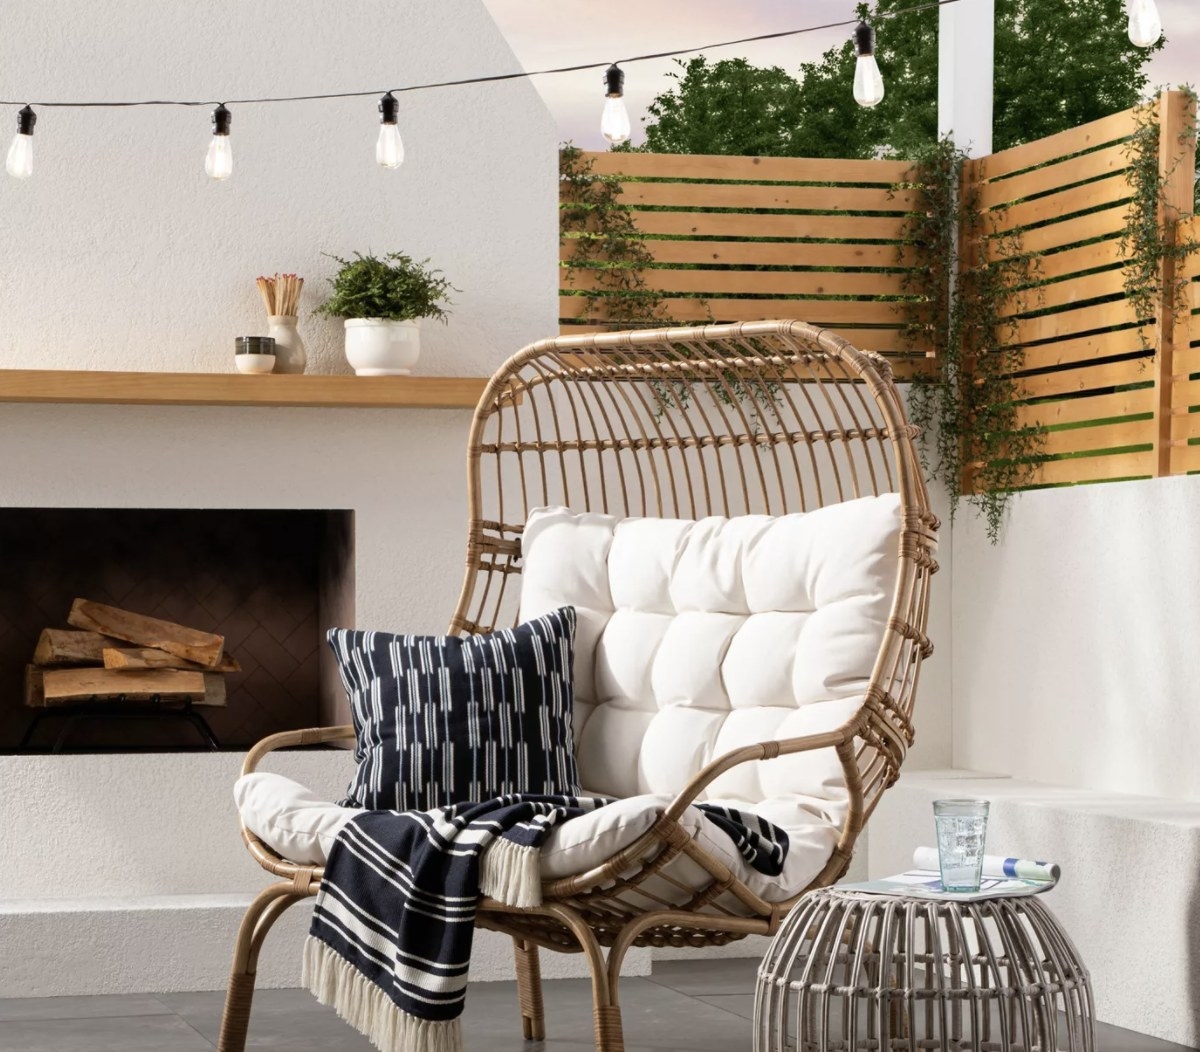 The woven dark brown chair frame has a white cushioned pillow and is in an outdoor patio